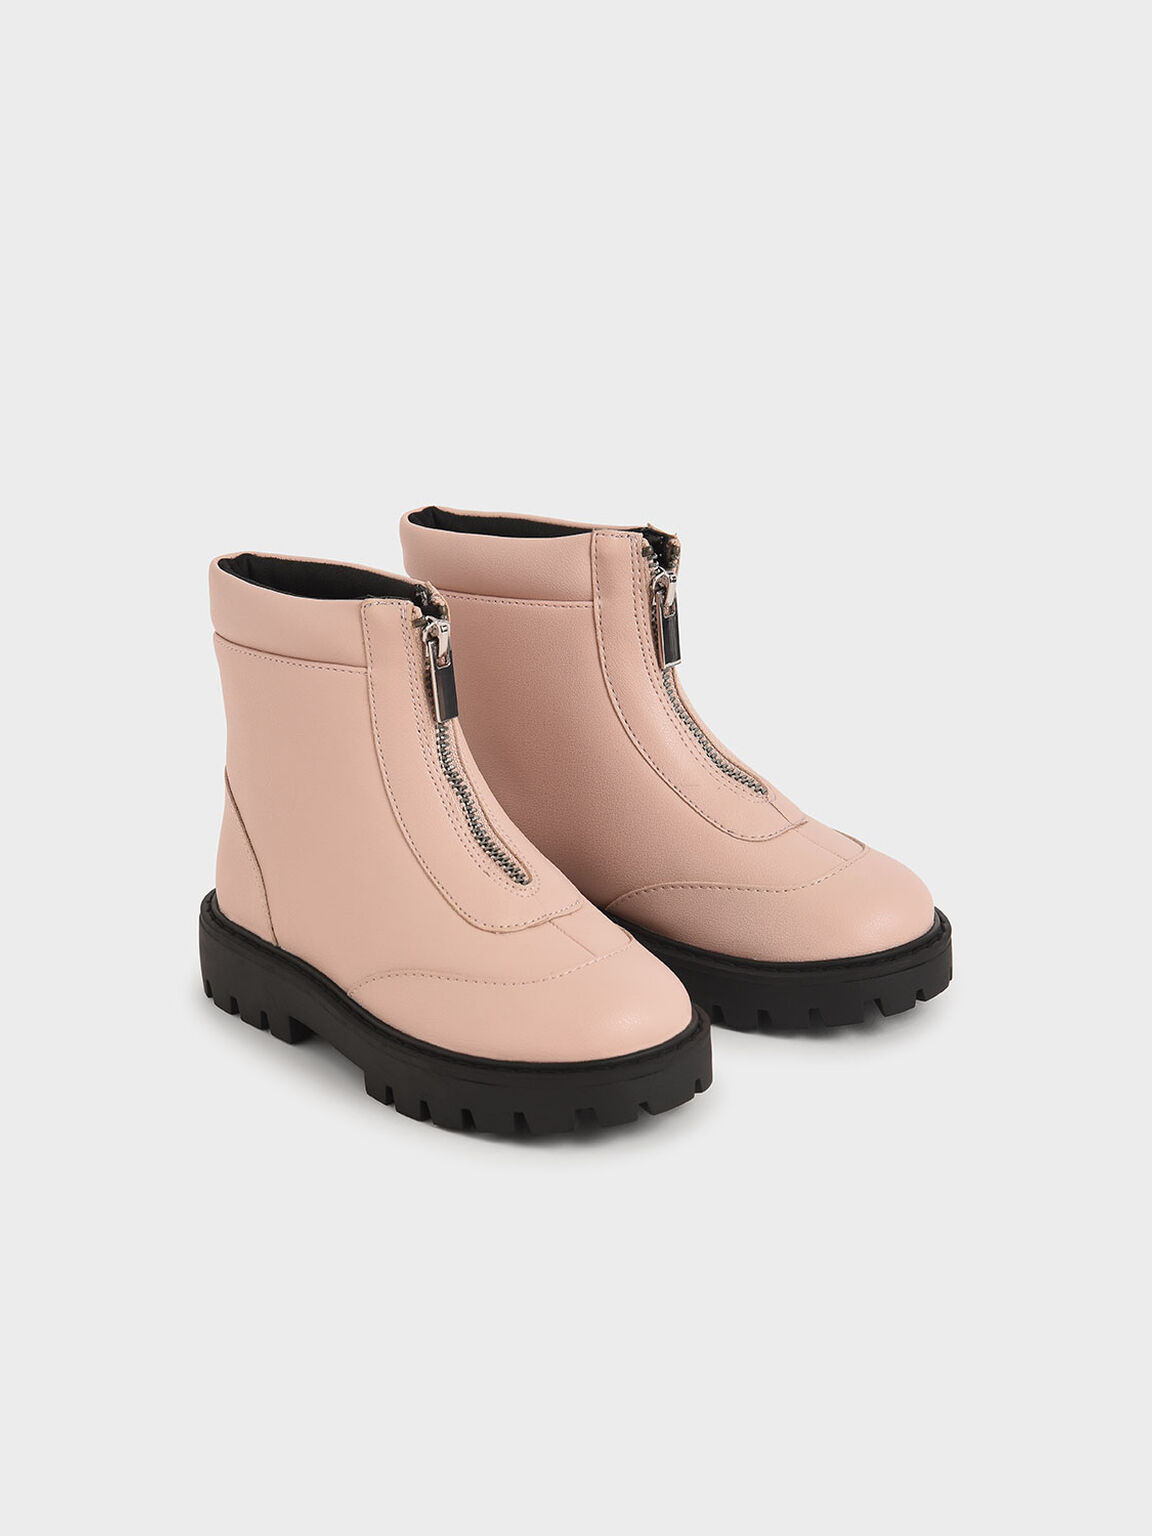 Girl's Front Zip Ankle Boots, Light Pink, hi-res